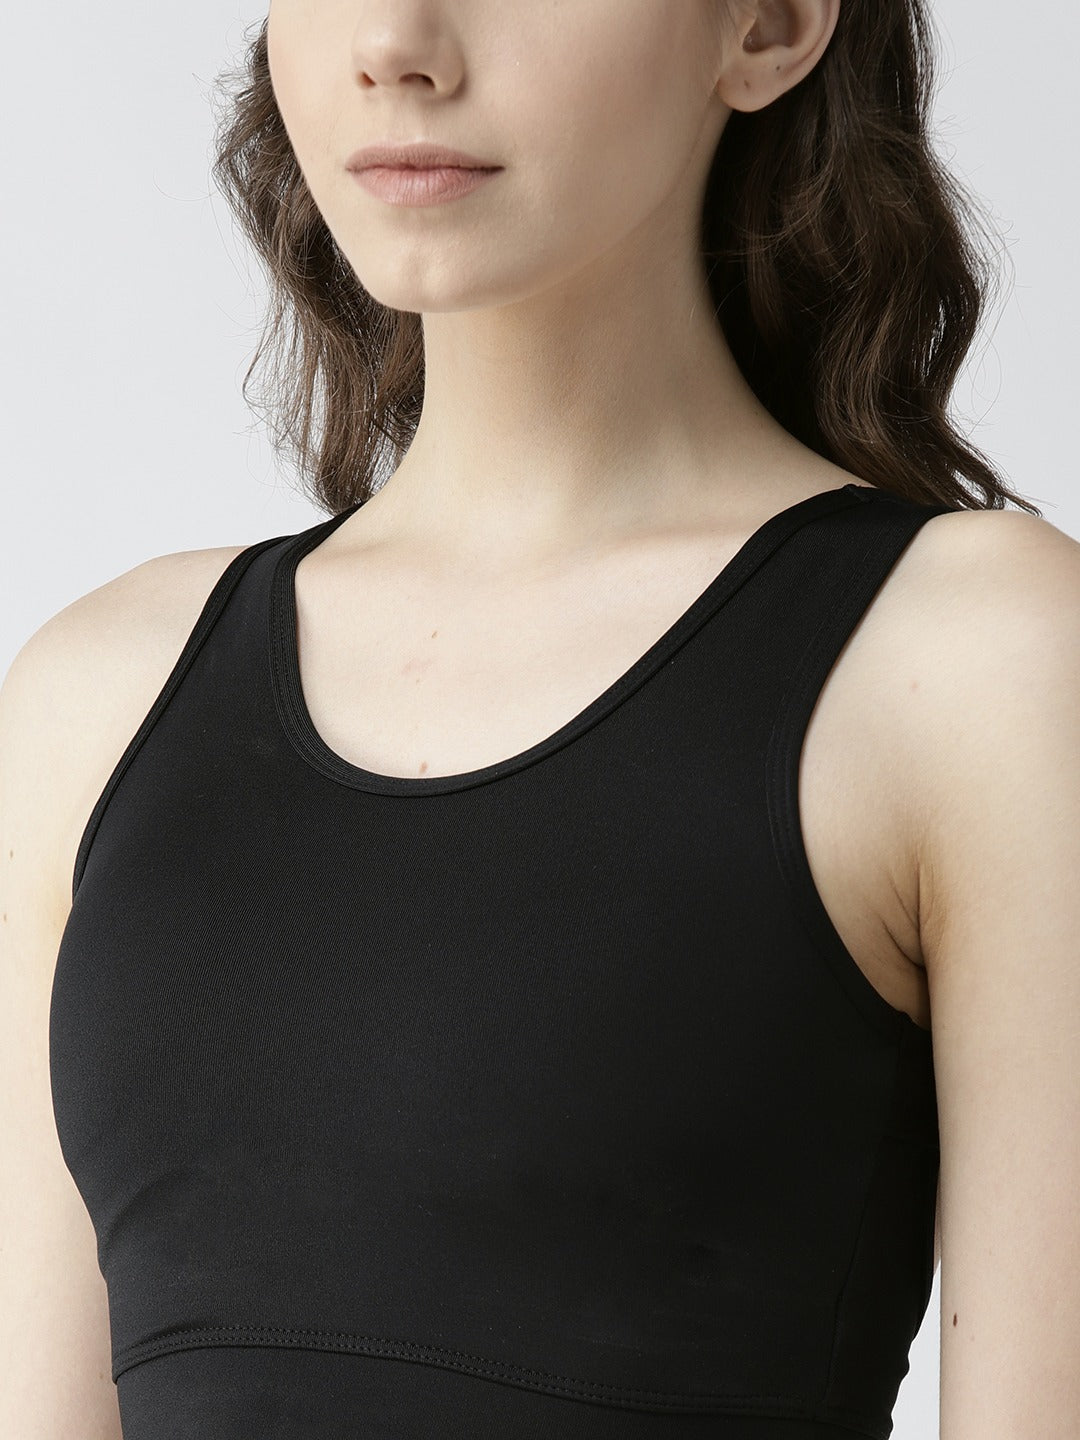 Fitkin Black One Shoulder Sports Bra With Front Net Detail